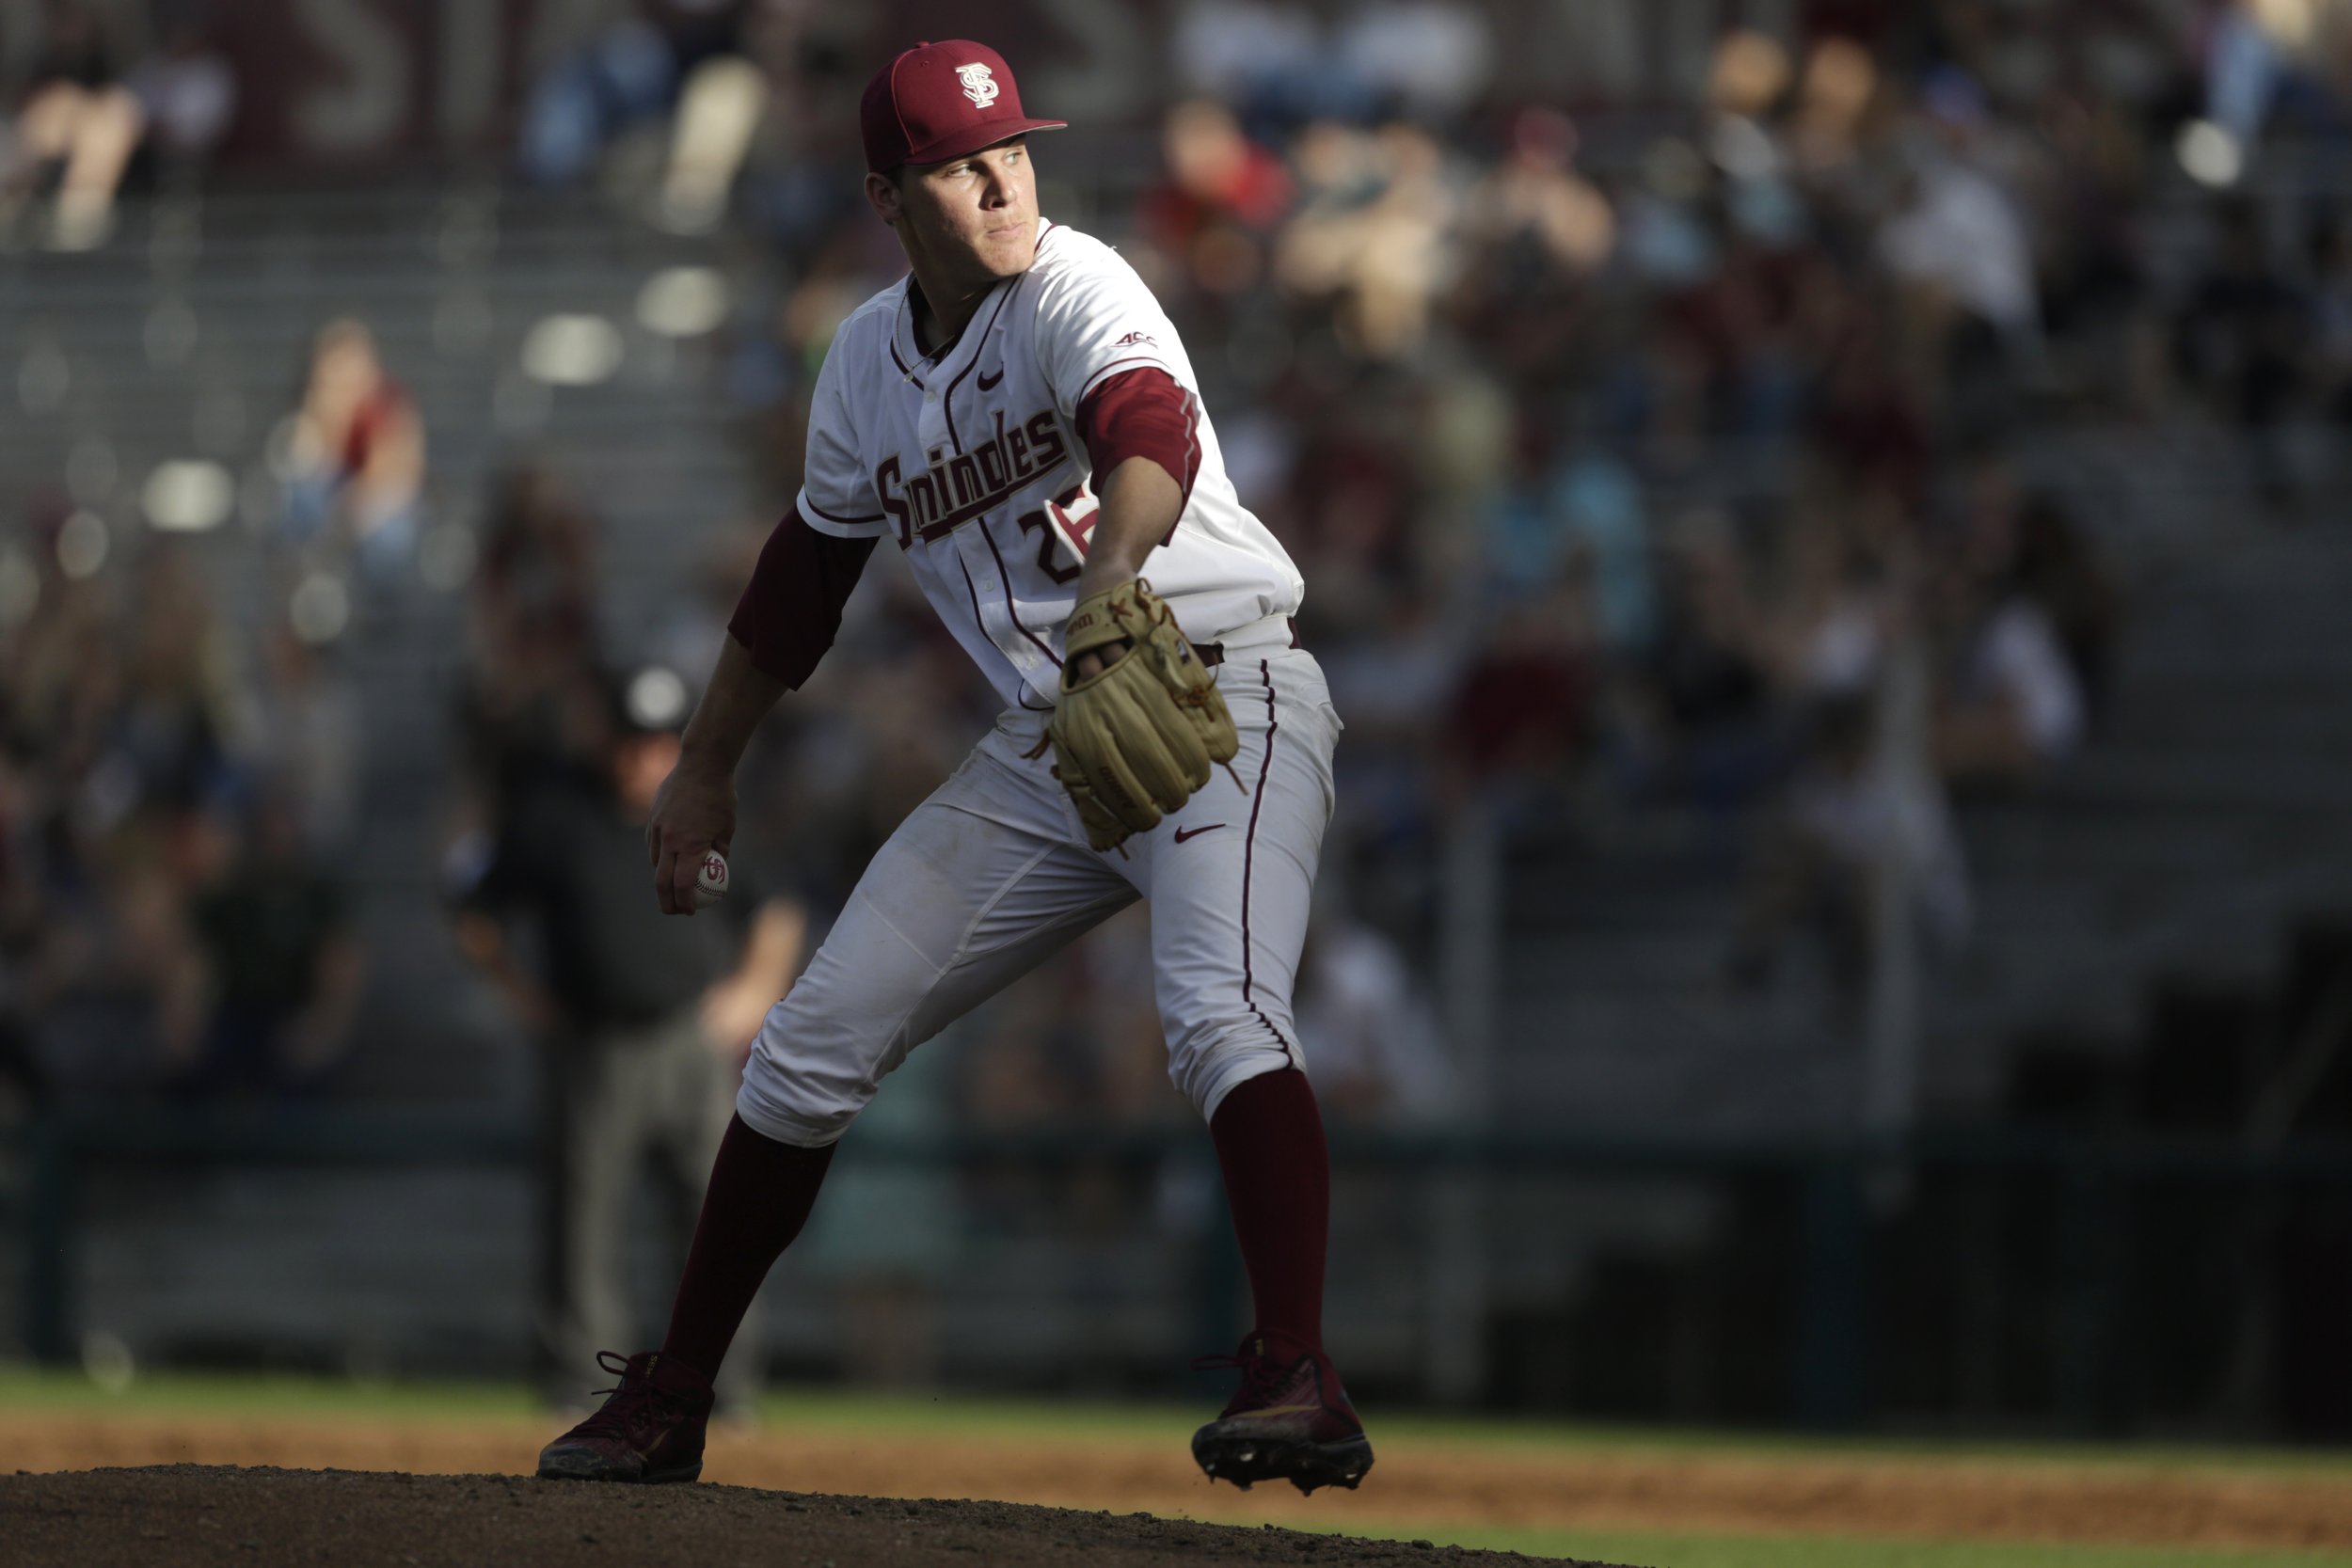  Florida State's Cole Sands pitches against Samford at the Dick Howser Stadium in Tallahassee, Fla., Friday, Feb. 24, 2017. 